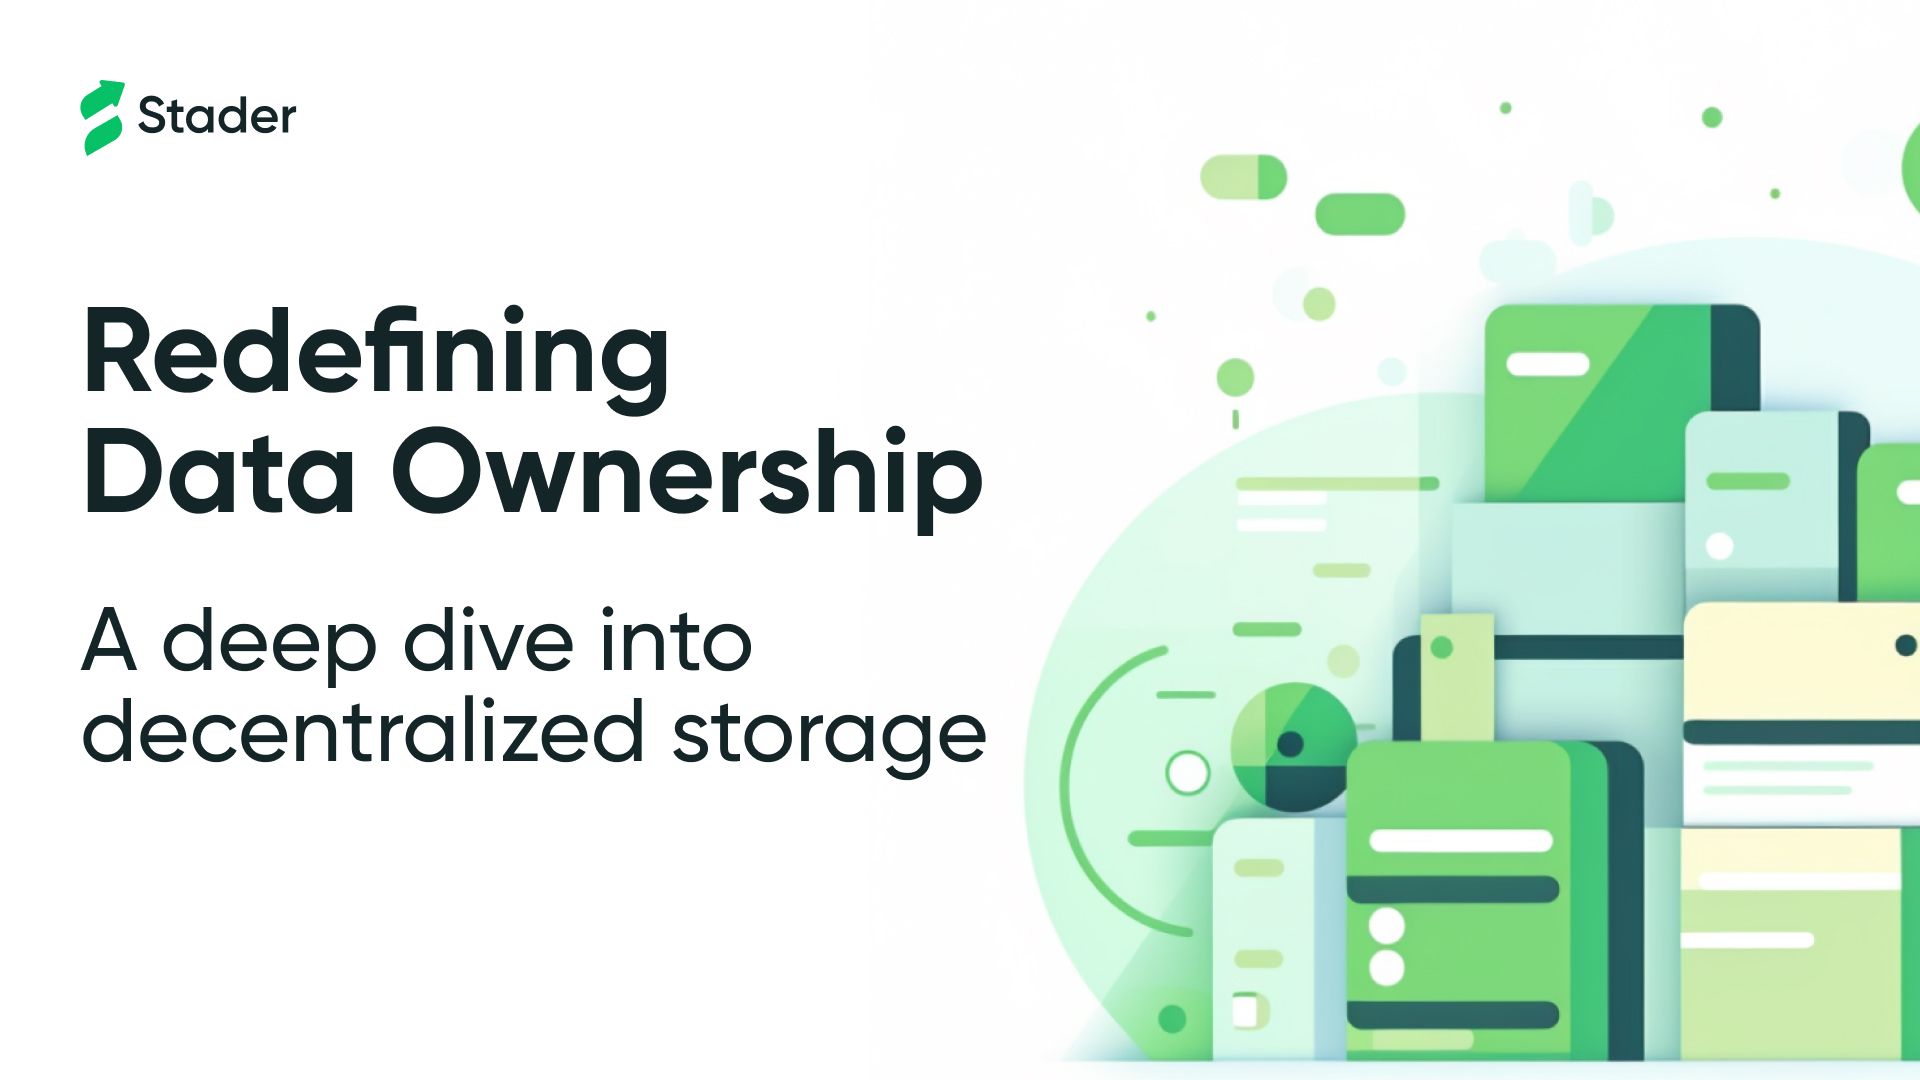 Redefining Data Ownership: A Deep Dive into Decentralized Storage